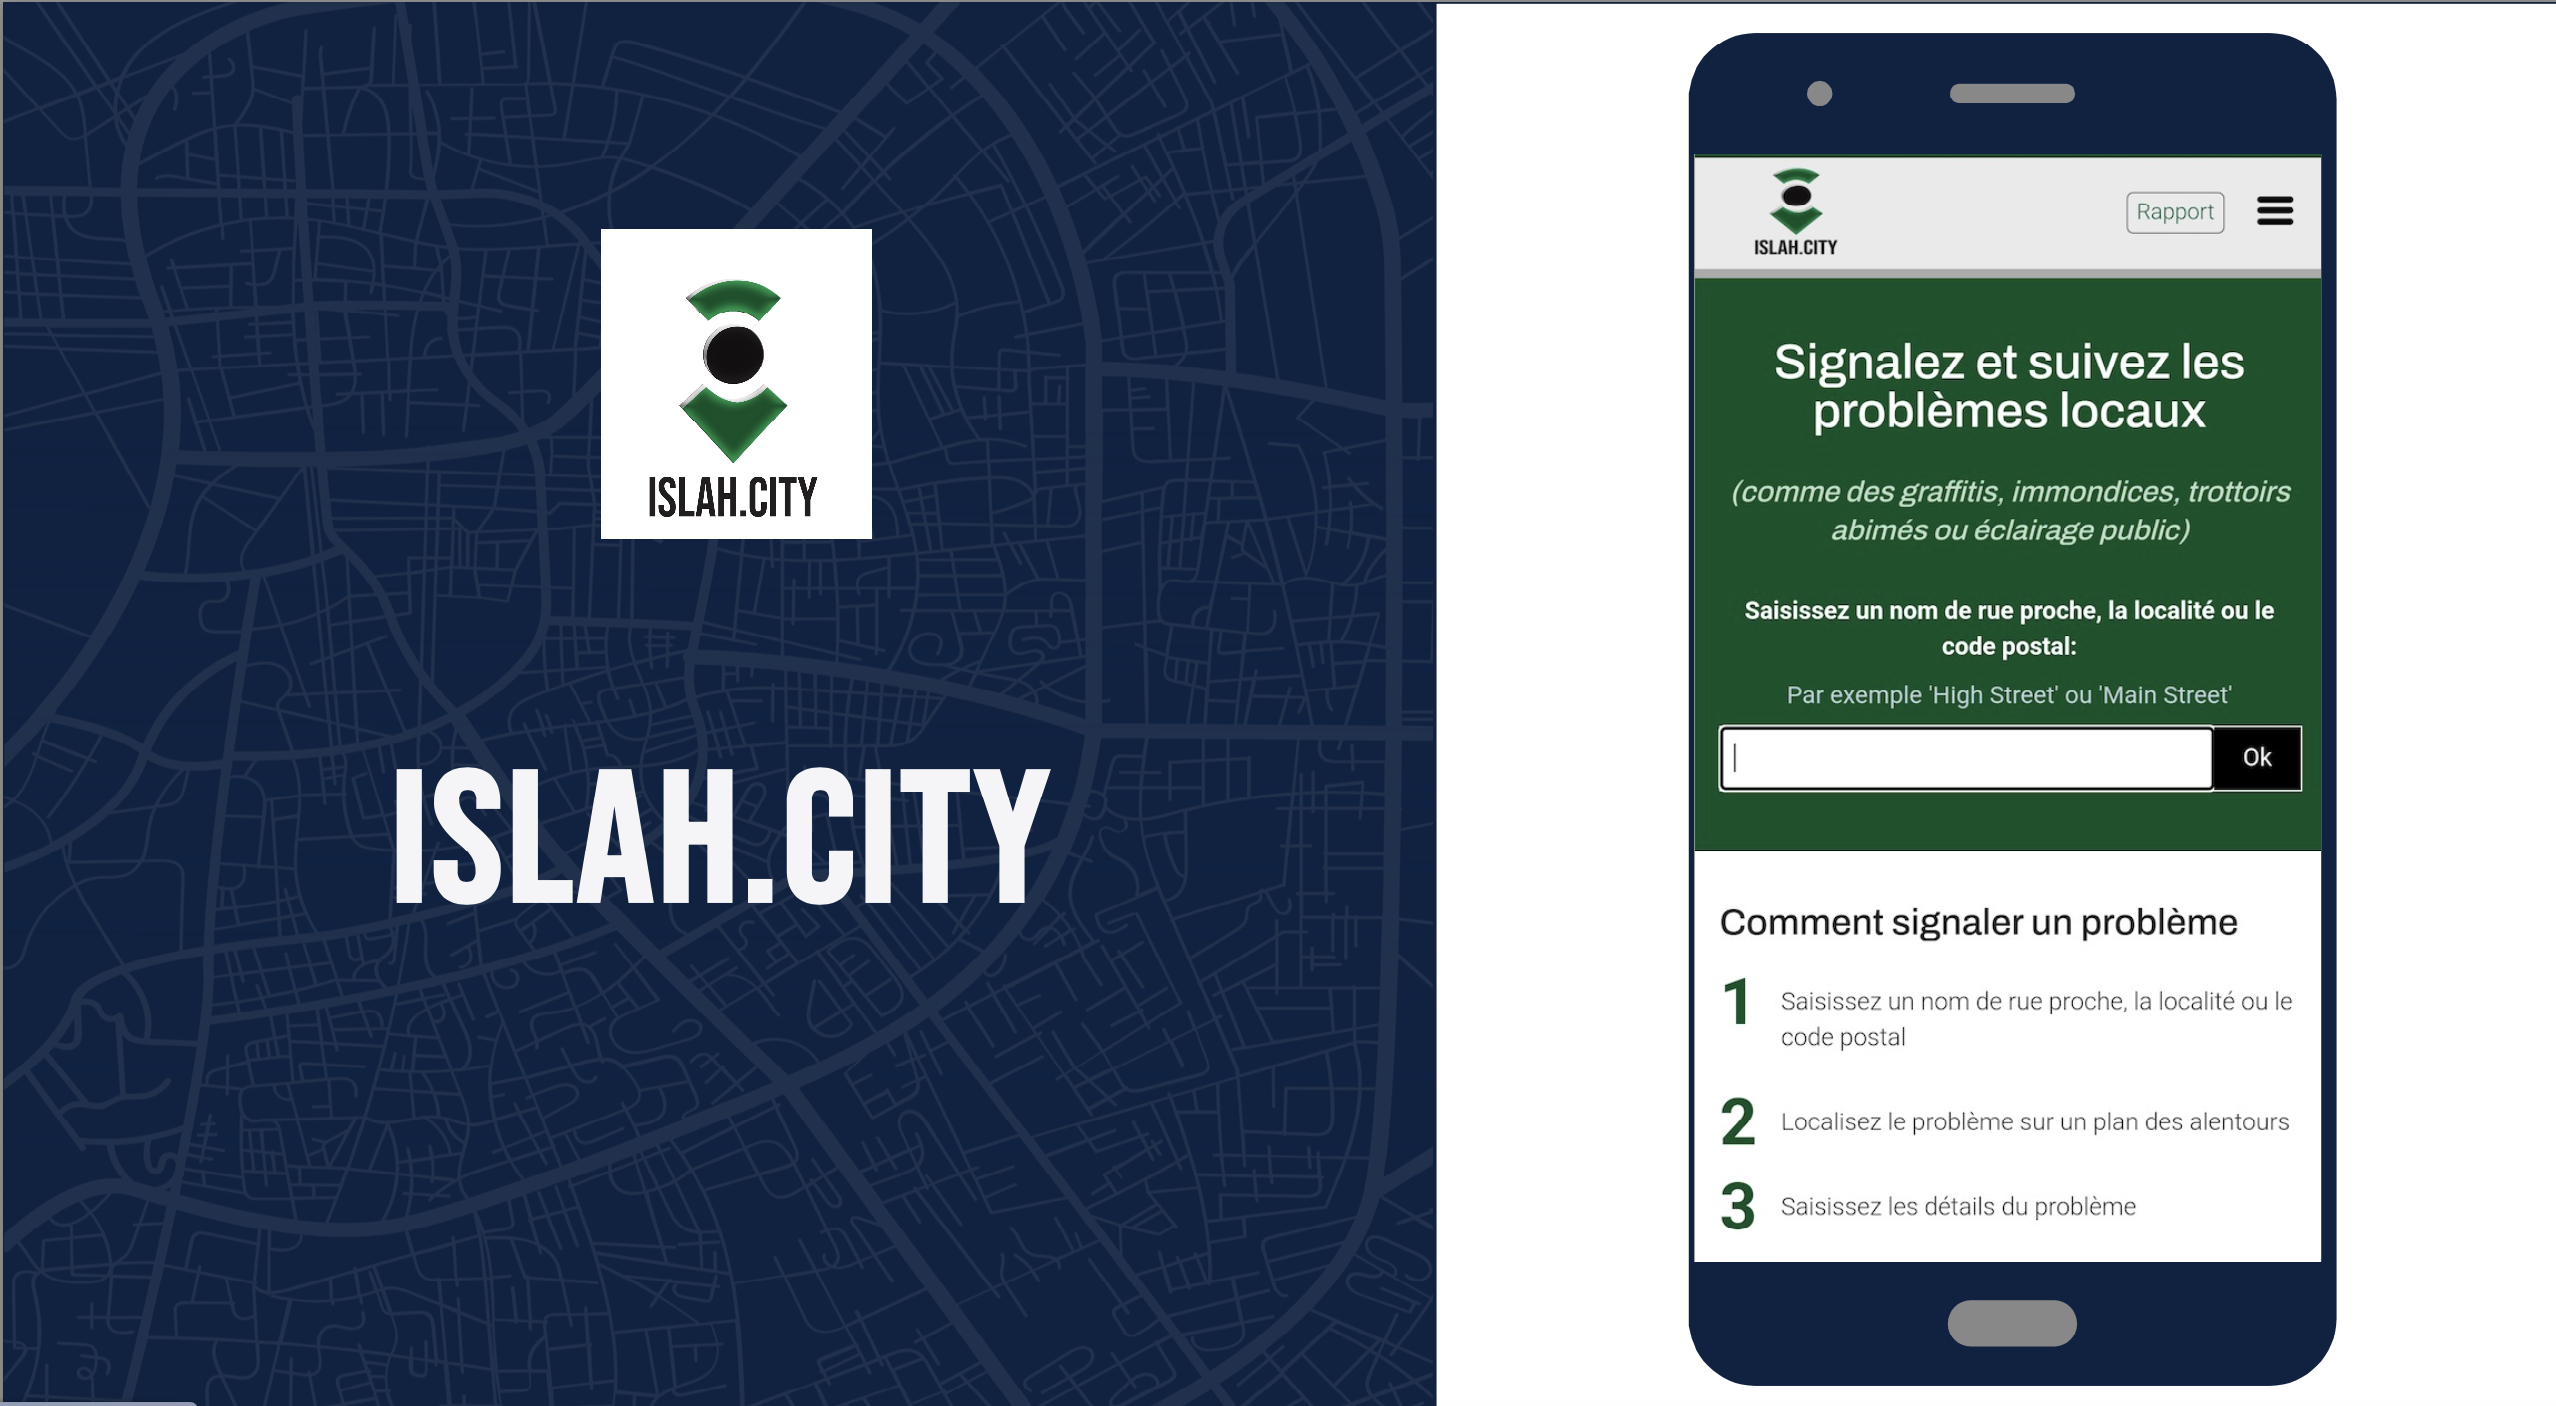 REVOLUTIONIZING CIVIC ENGAGEMENT: THE STORY OF ISLAH.CITY IN MOROCCO